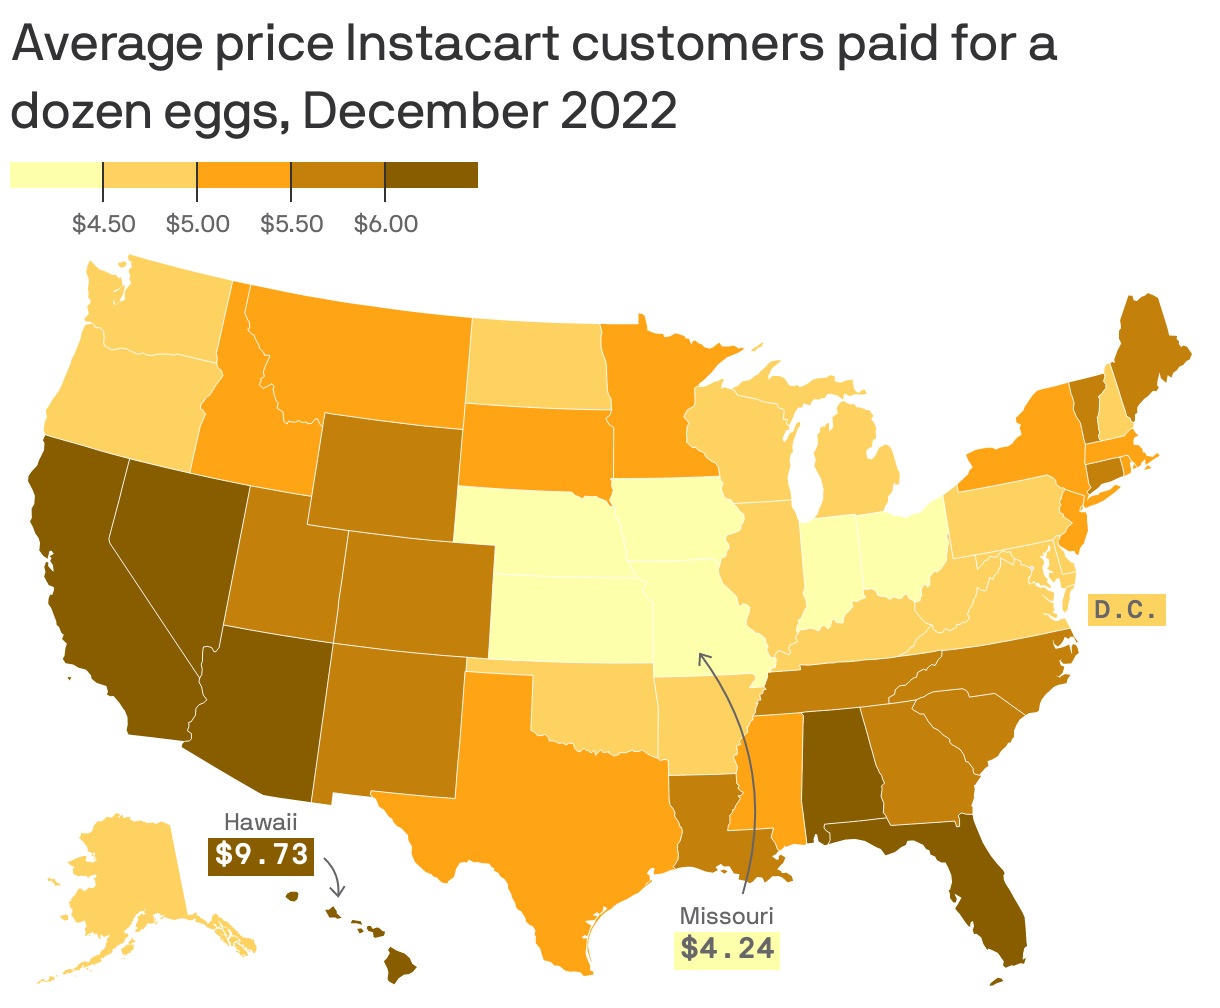 Average price Instacart customers paid for a dozen eggs, December 2022